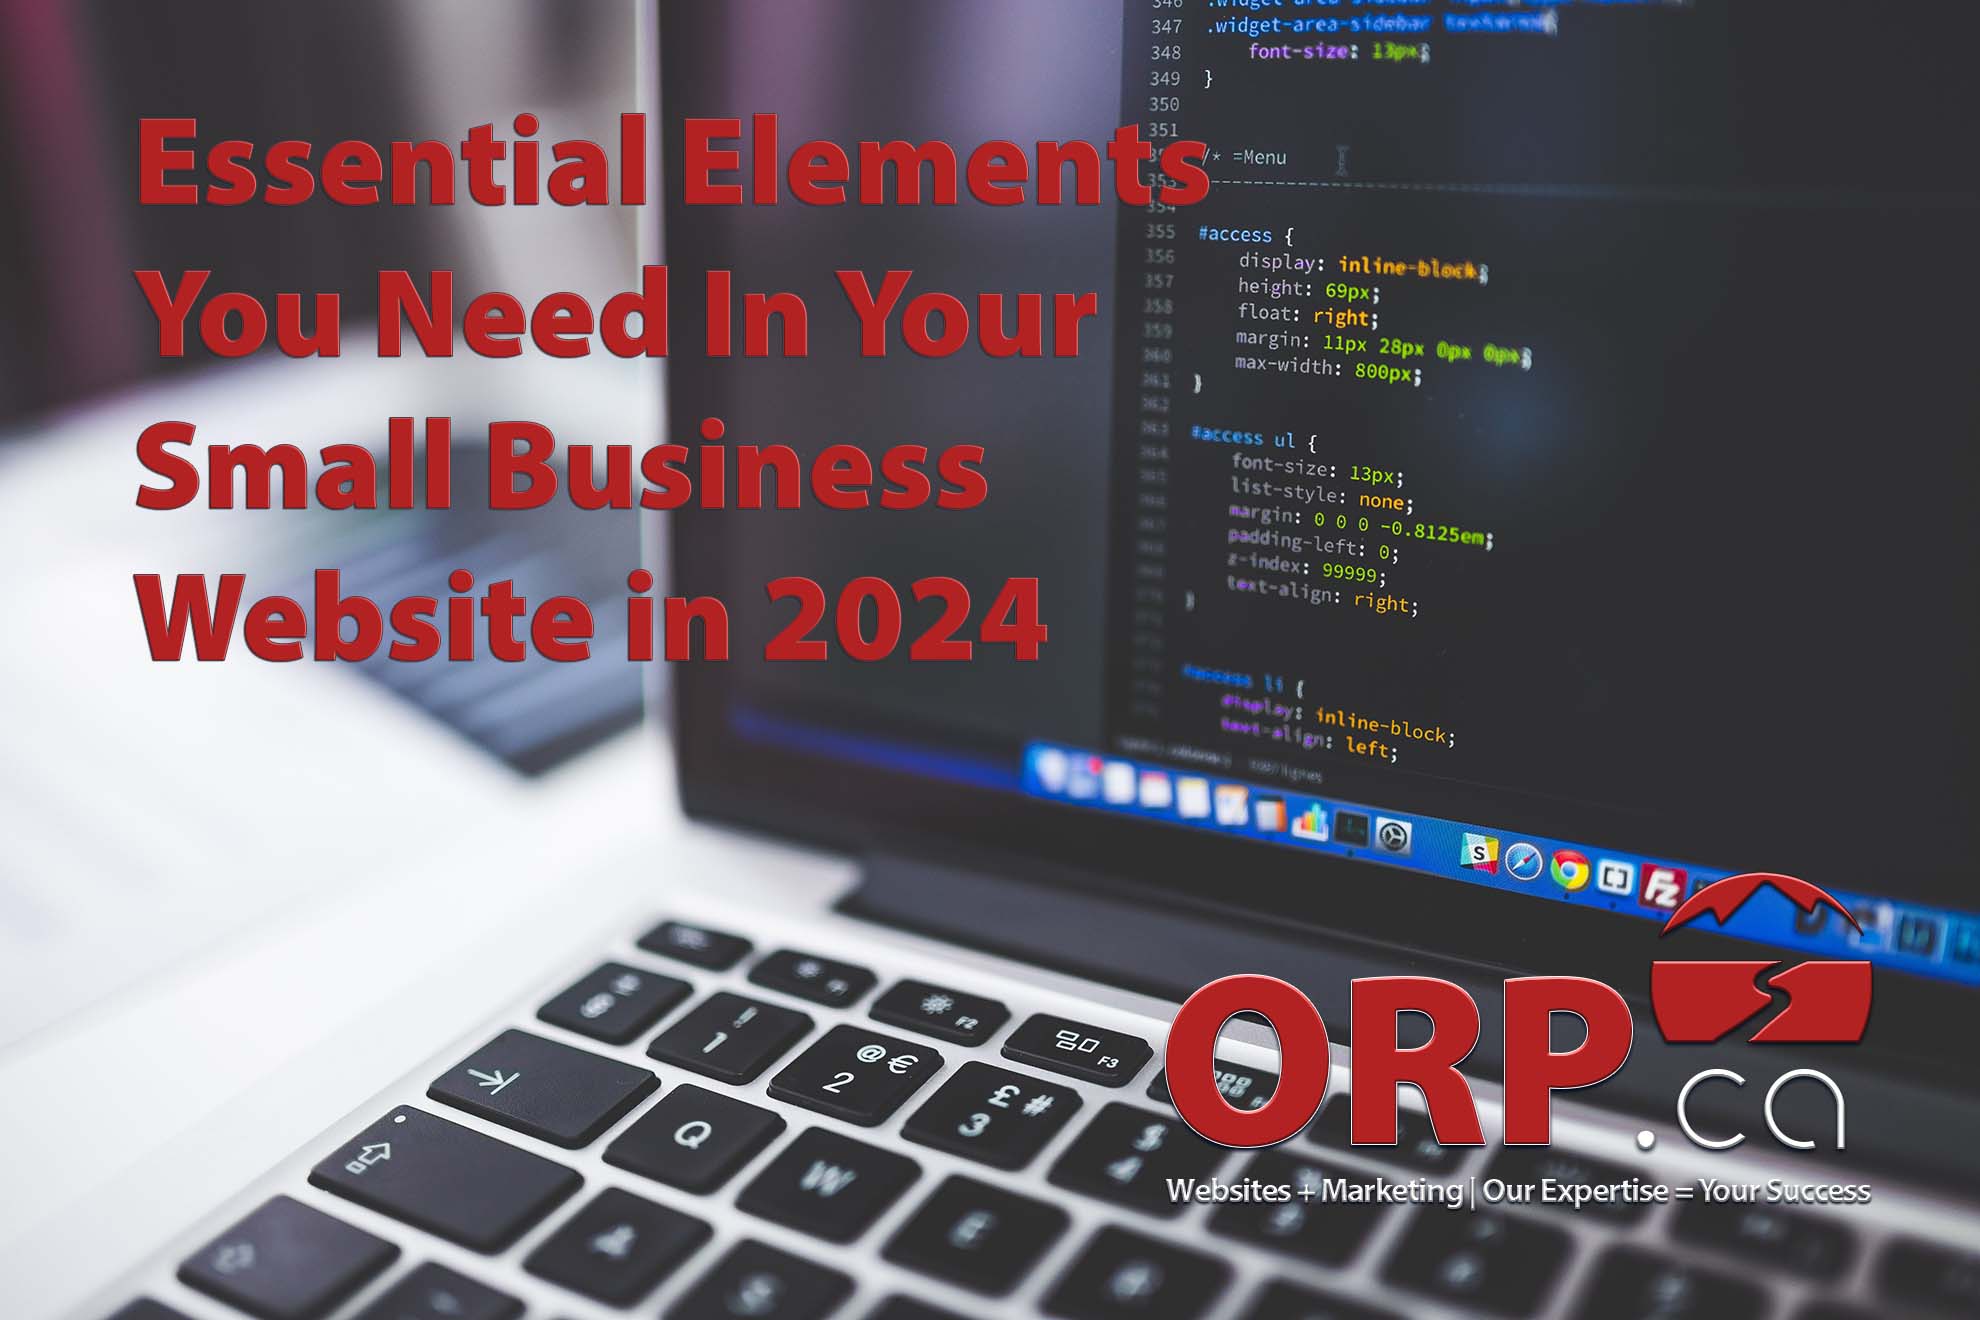 Essential Elements You Need In Your Small Business Website in 2024 - a small business digital marketing article from ORP.ca - Website design and support, digital marketing and consulting services.